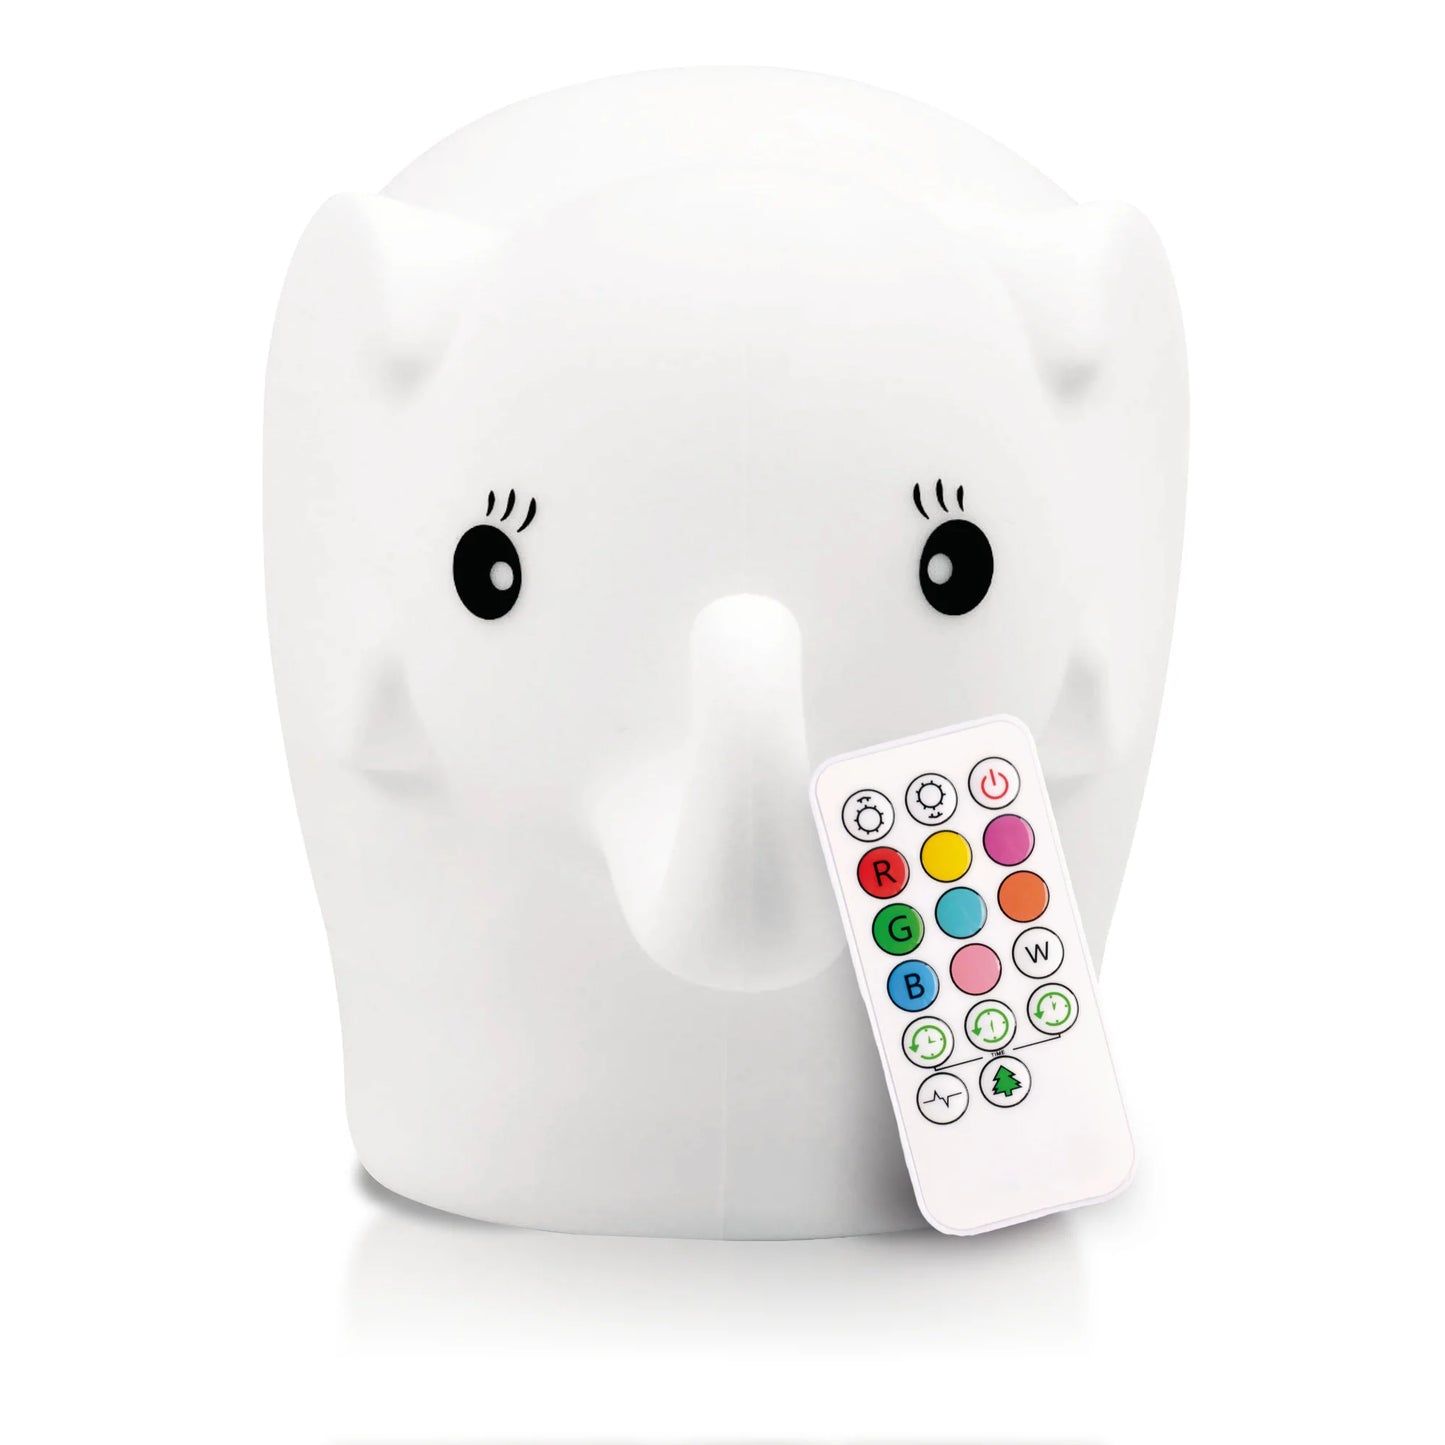 White silicon elephant on all fours that lights up on touch, or with remote (included in picture)